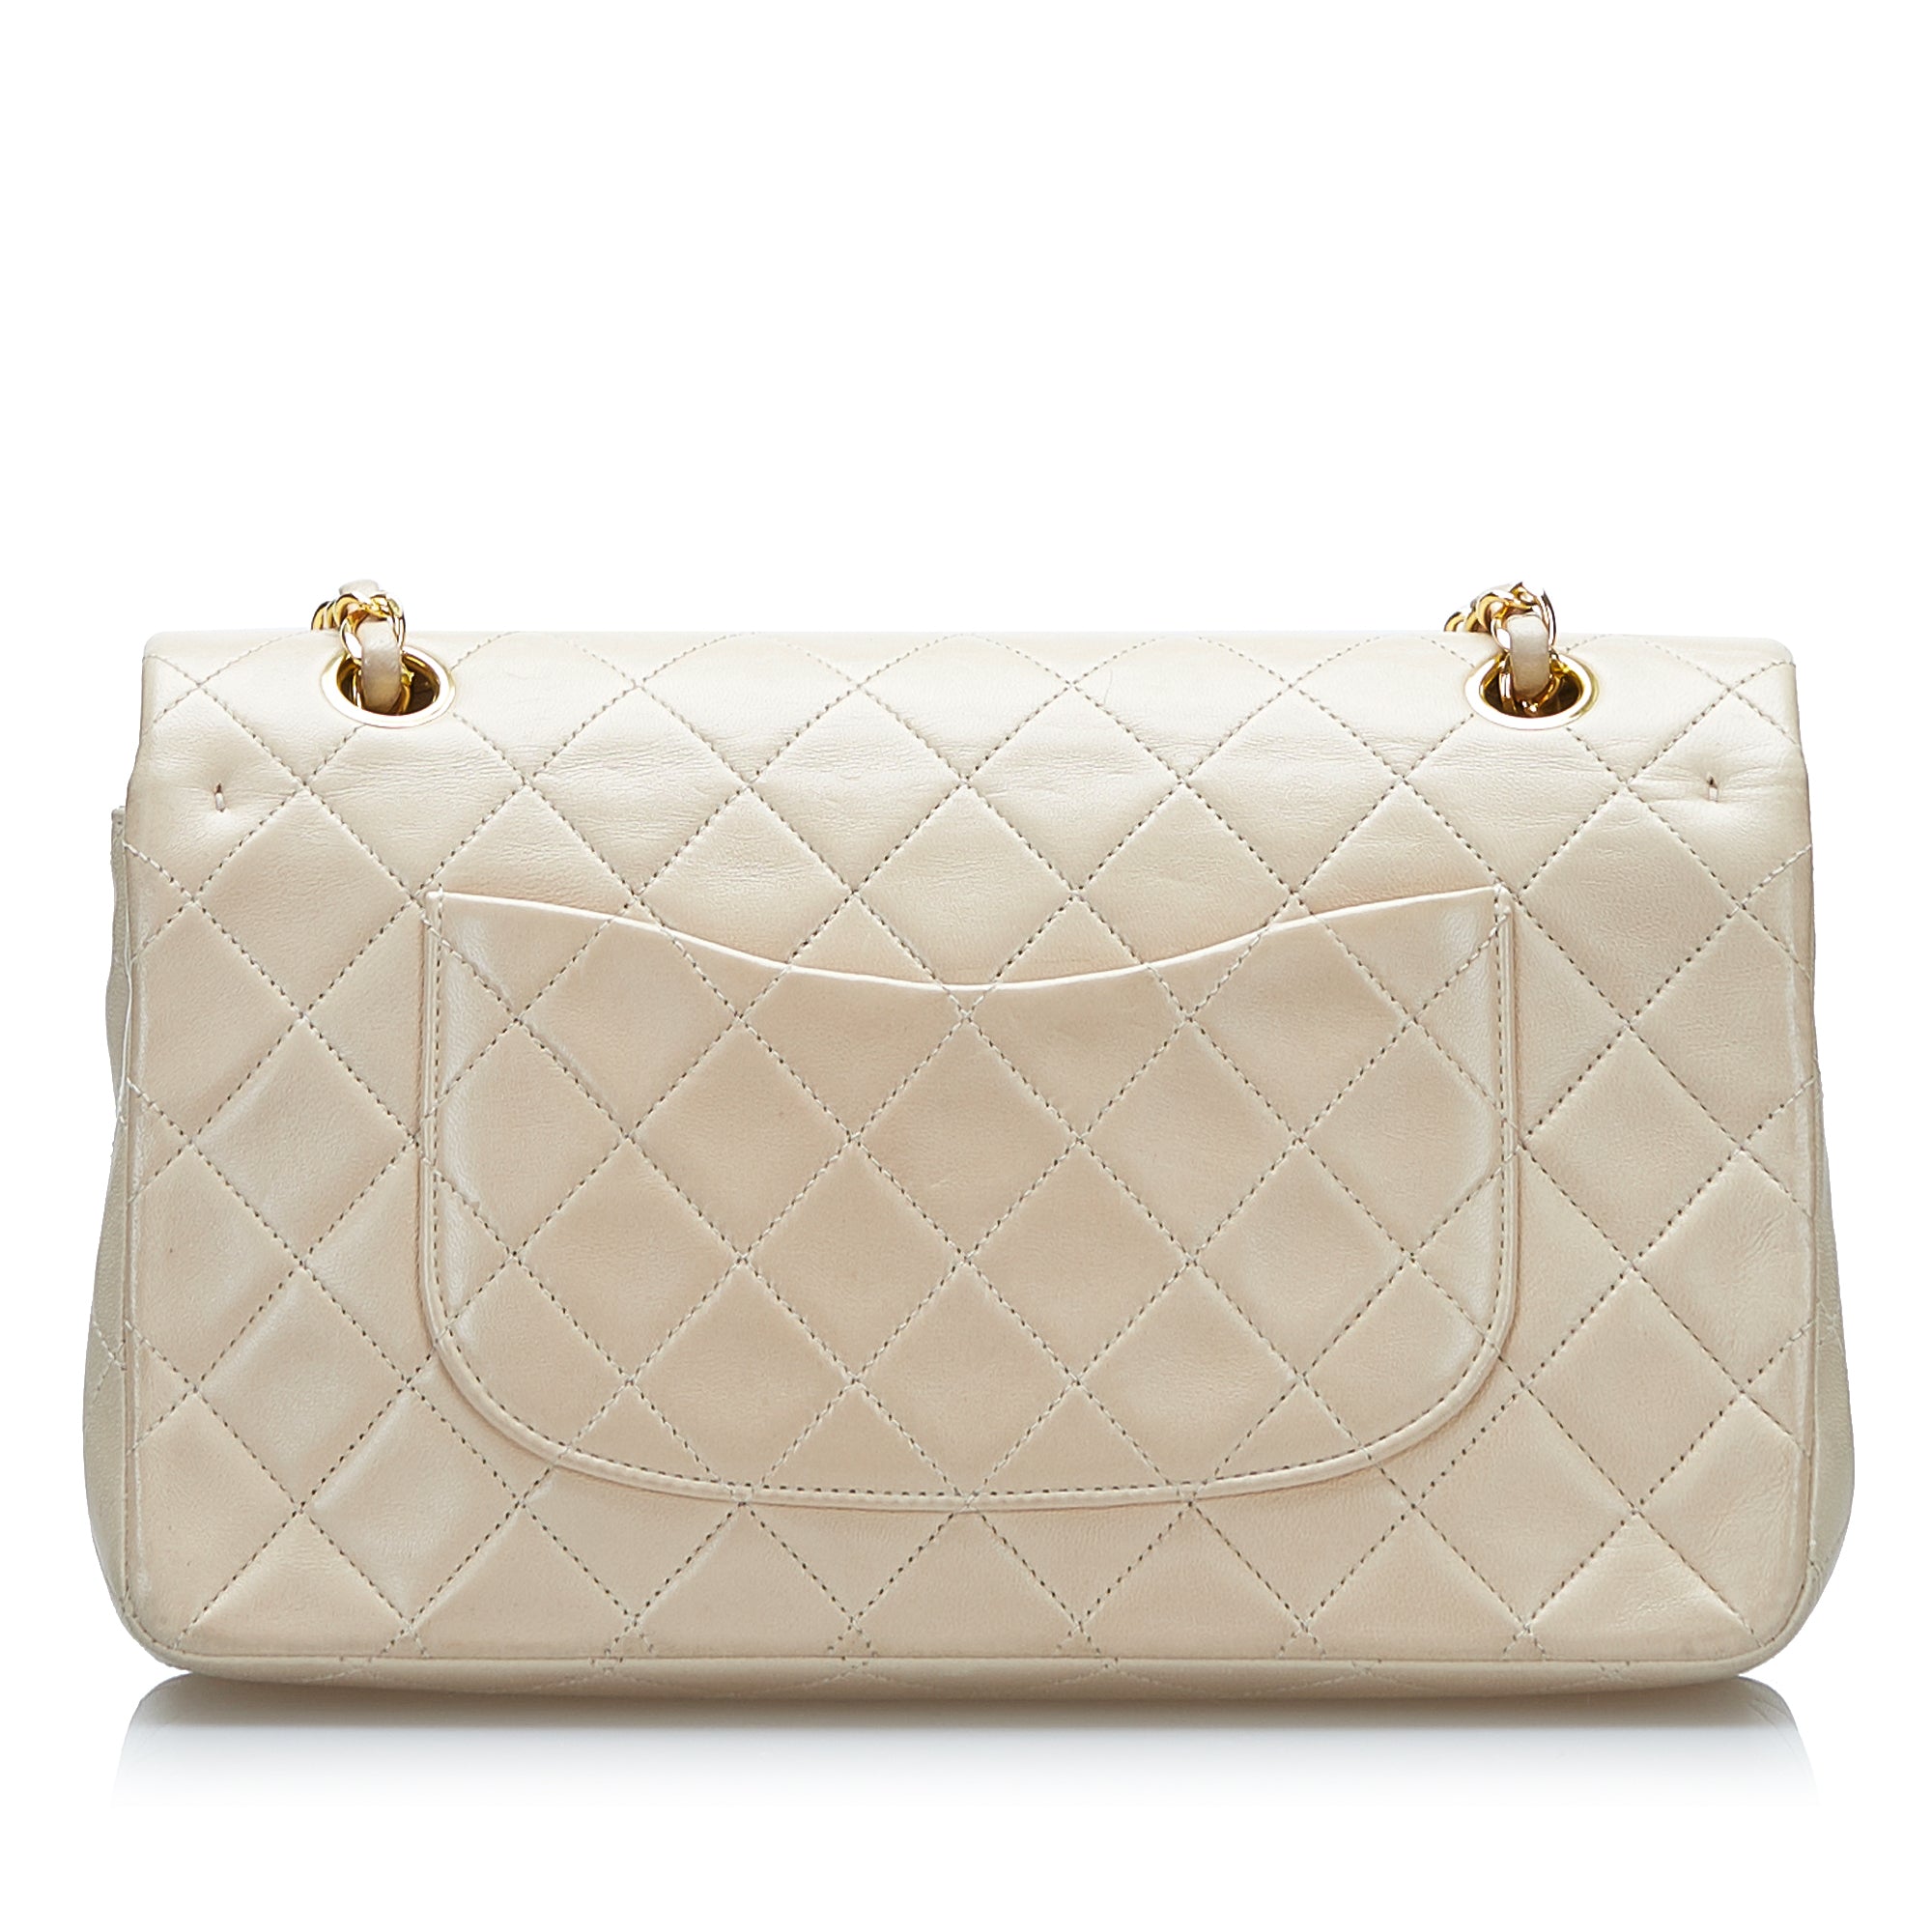 Chanel Iridescent Ivory Small Classic Flap Bag